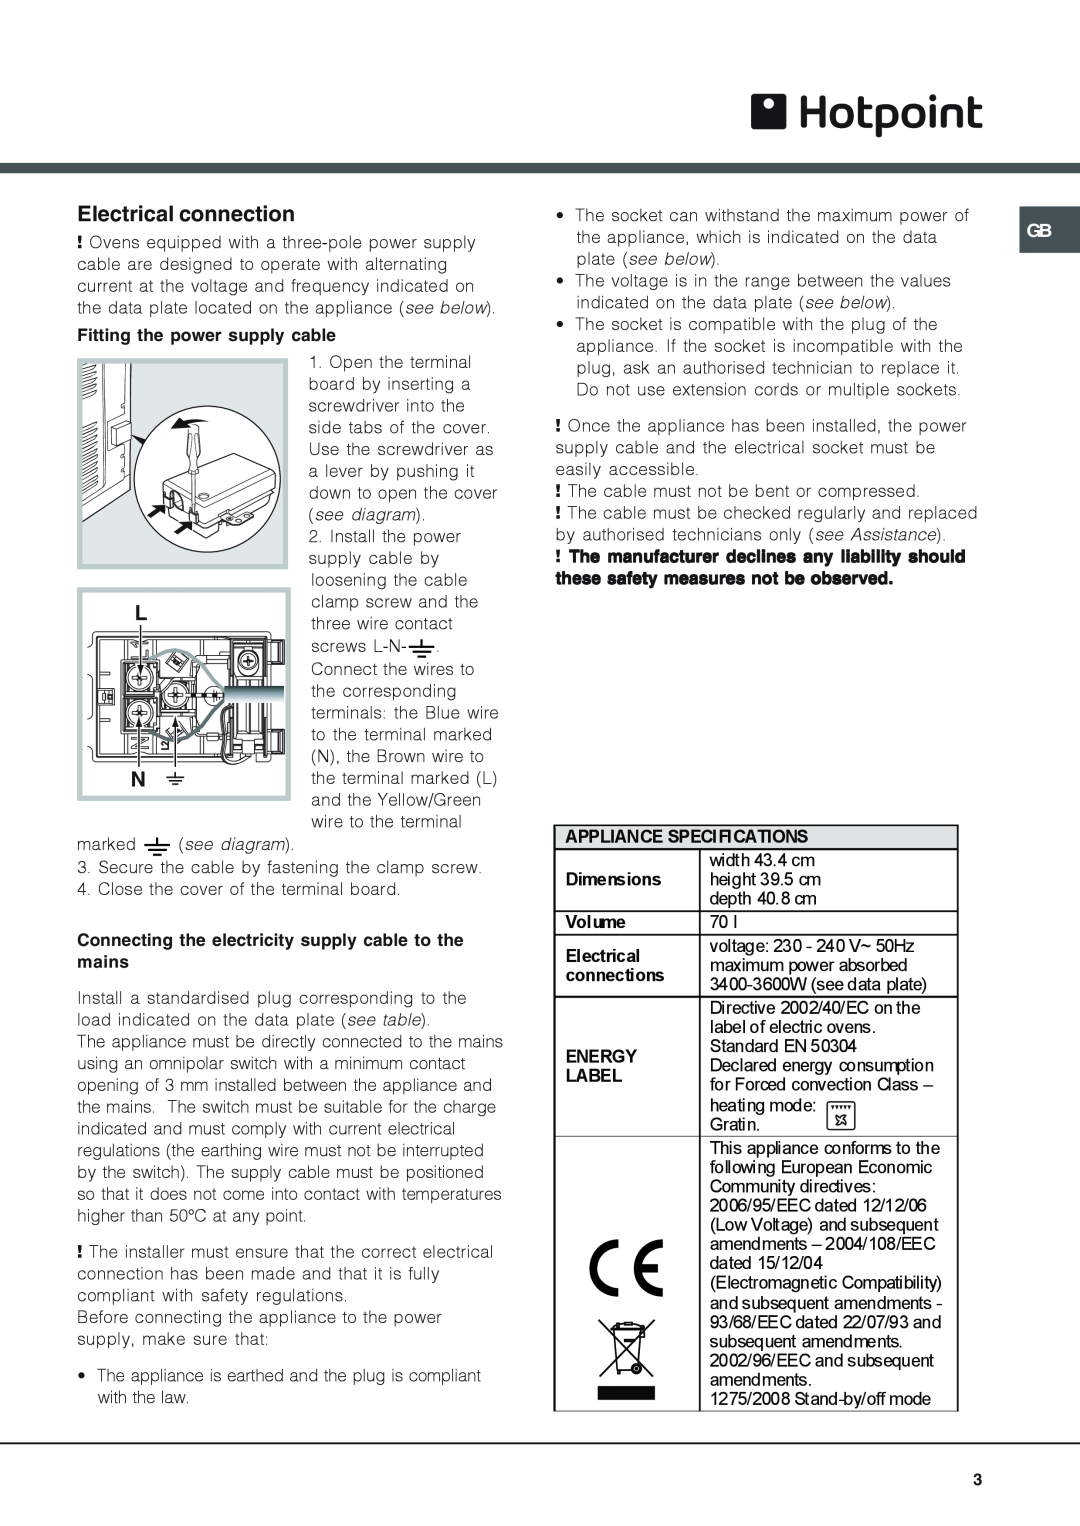 Hotpoint OS 897D P IX/HP manual Electrical connection, Fitting the power supply cable, Appliance Specifications, Dimensions 